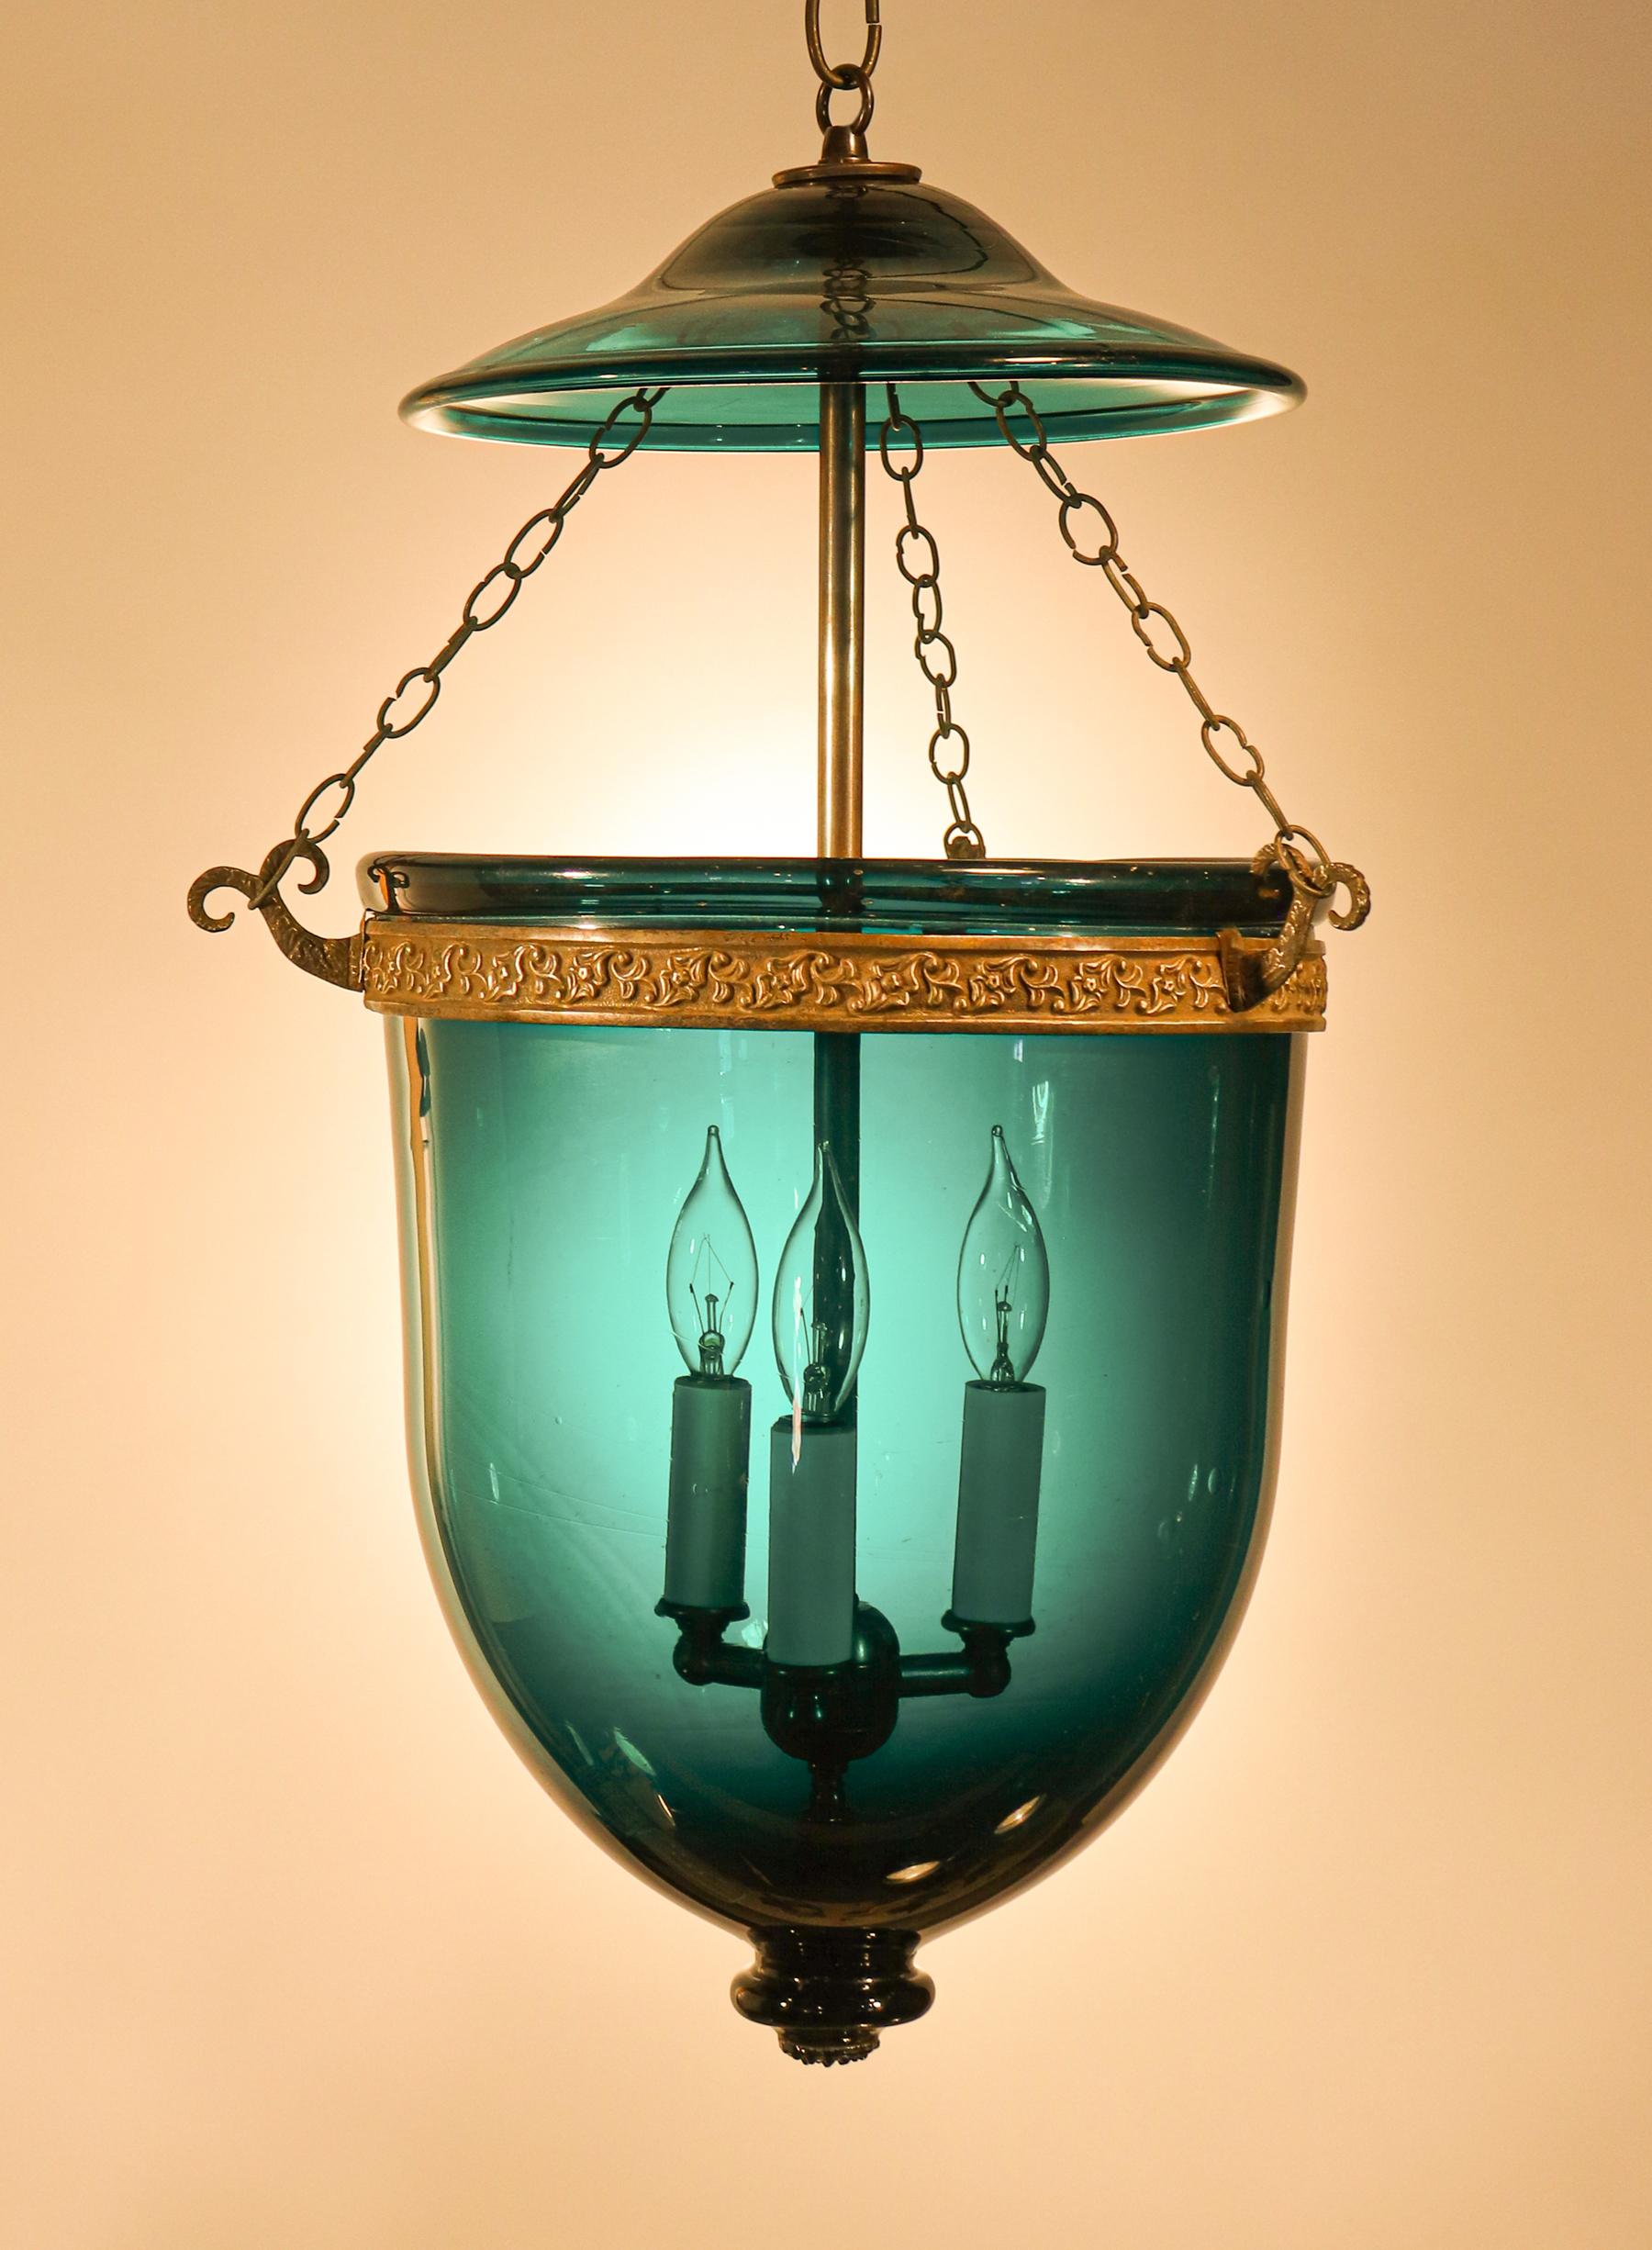 An exquisite dark teal hued bell jar lantern from England, circa 1870. This deep green-blue lantern has lovely form and is adorned with an authentic antique brass band that is embossed with a floral motif. The quality of the lantern is very good,